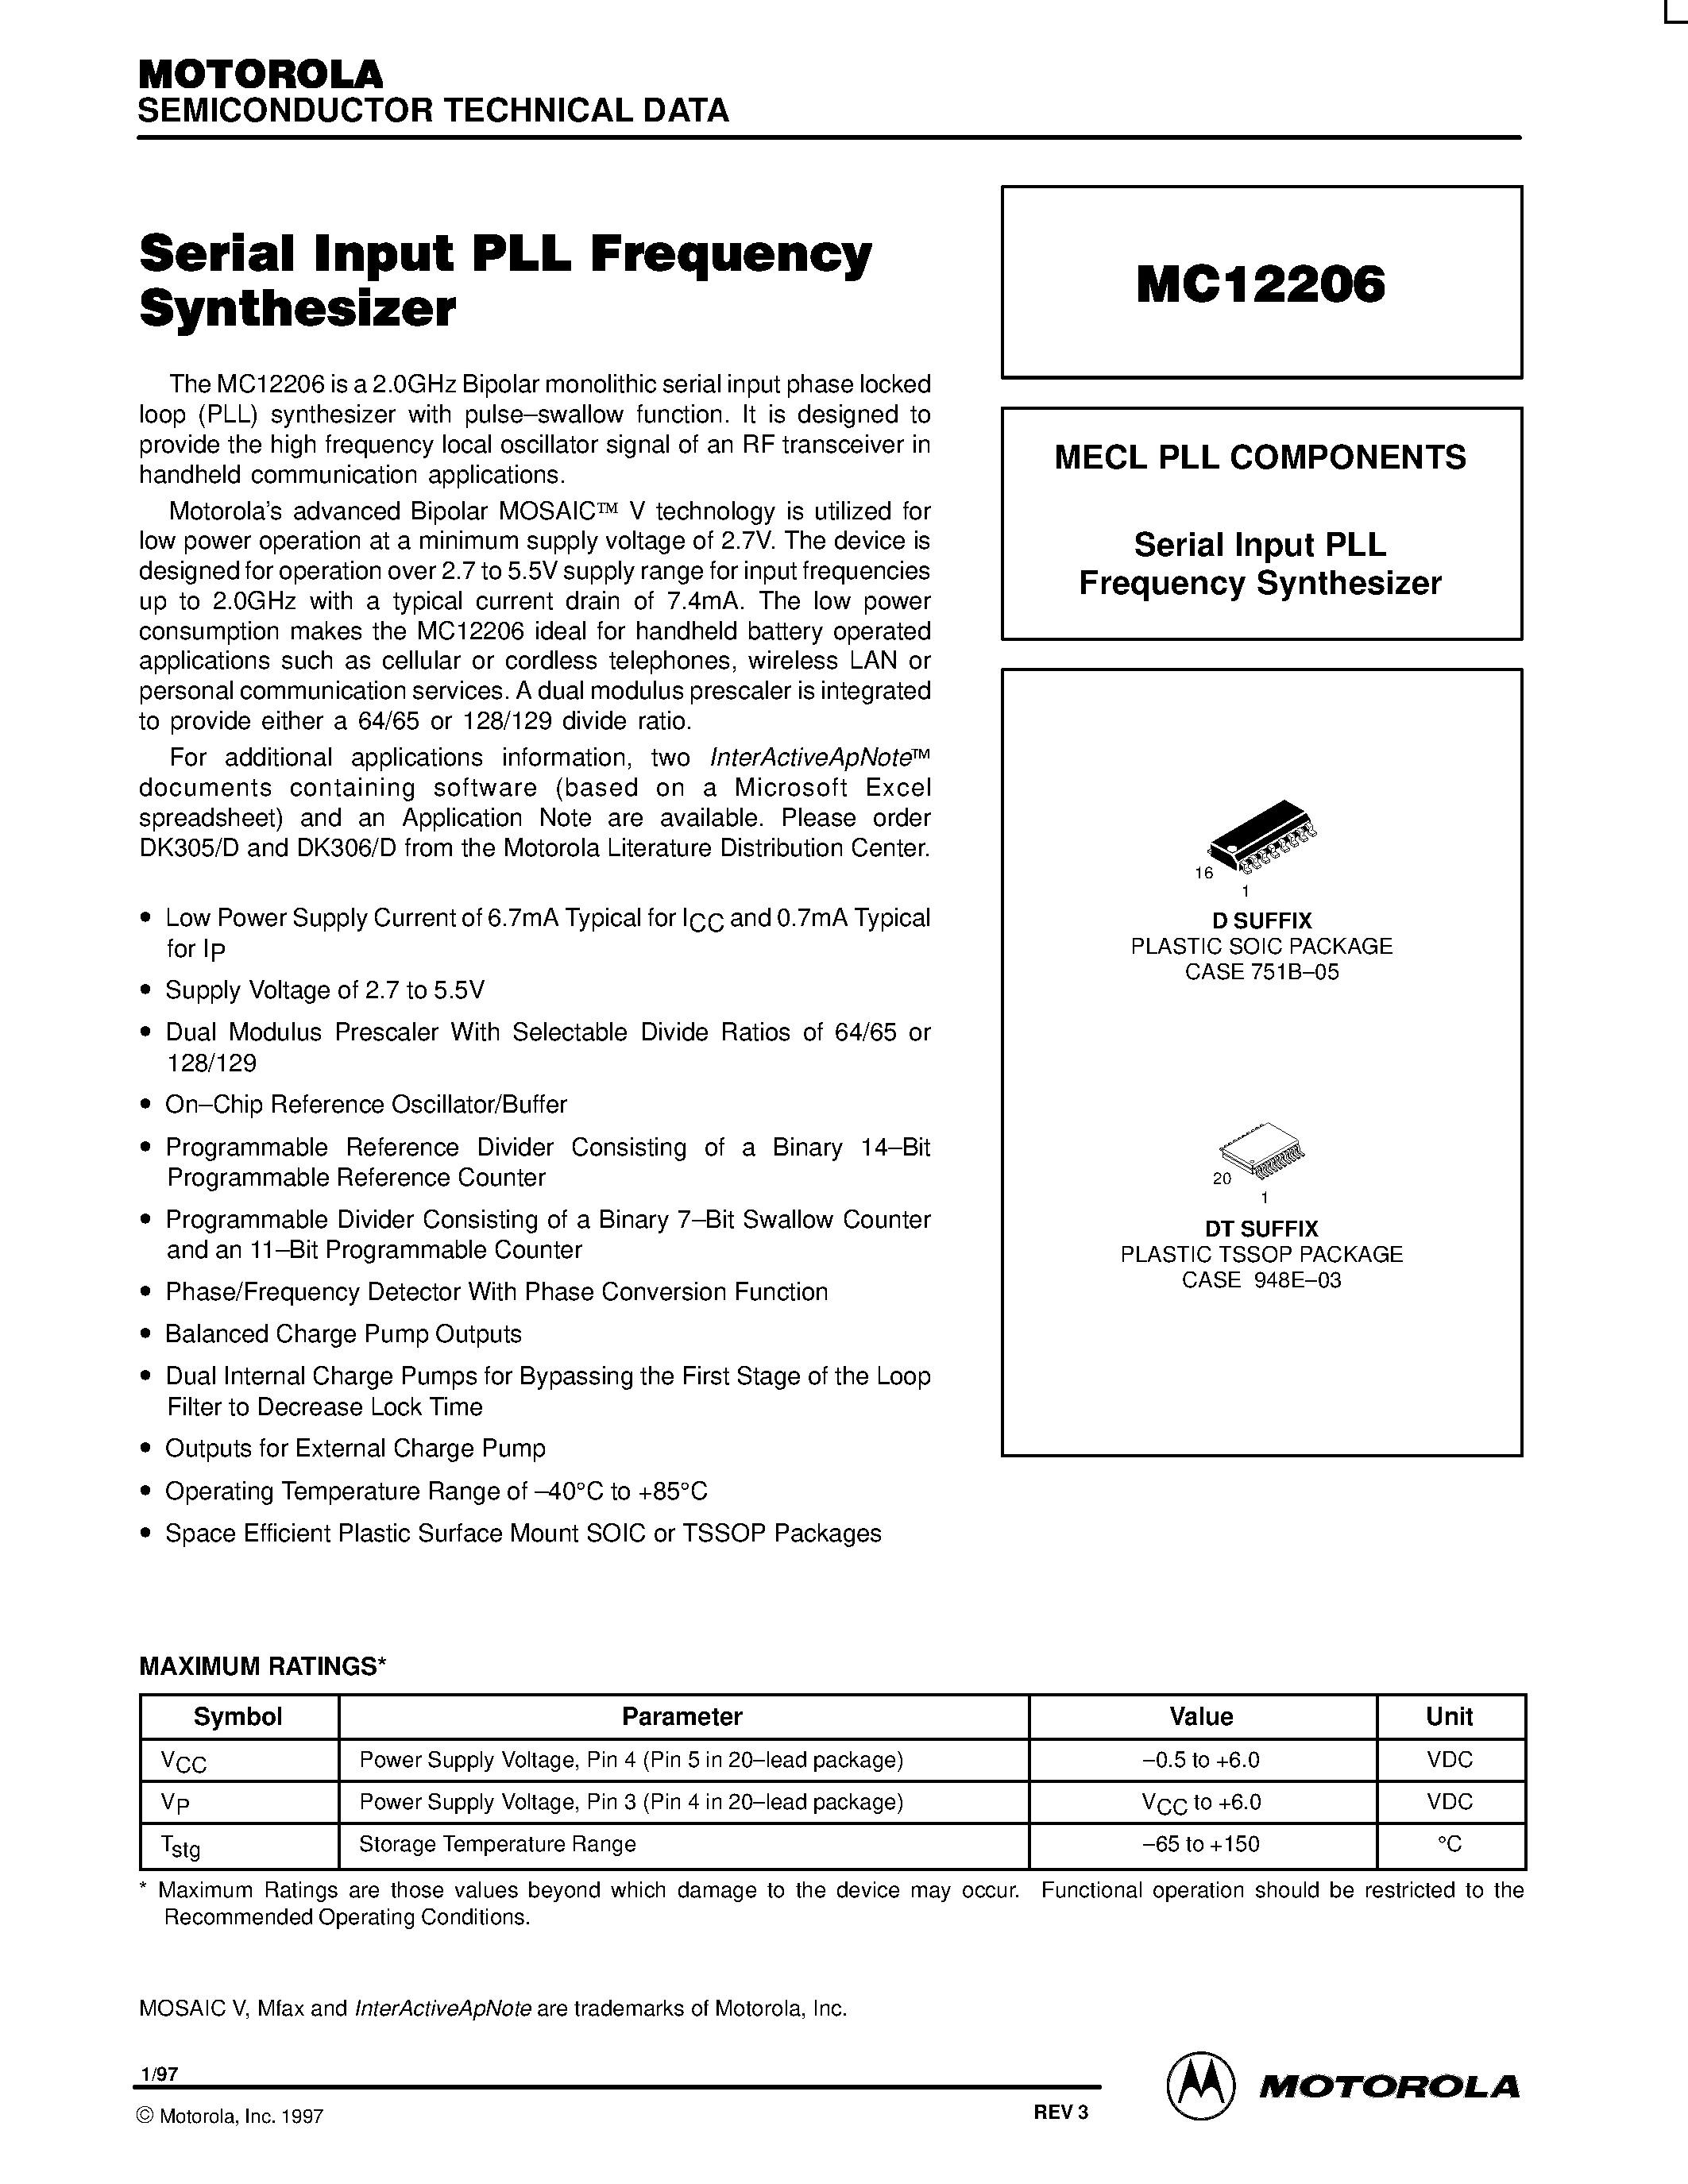 Datasheet MC12206D - MECL PLL COMPONENTS Serial Input PLL Frequency Synthesizer page 1